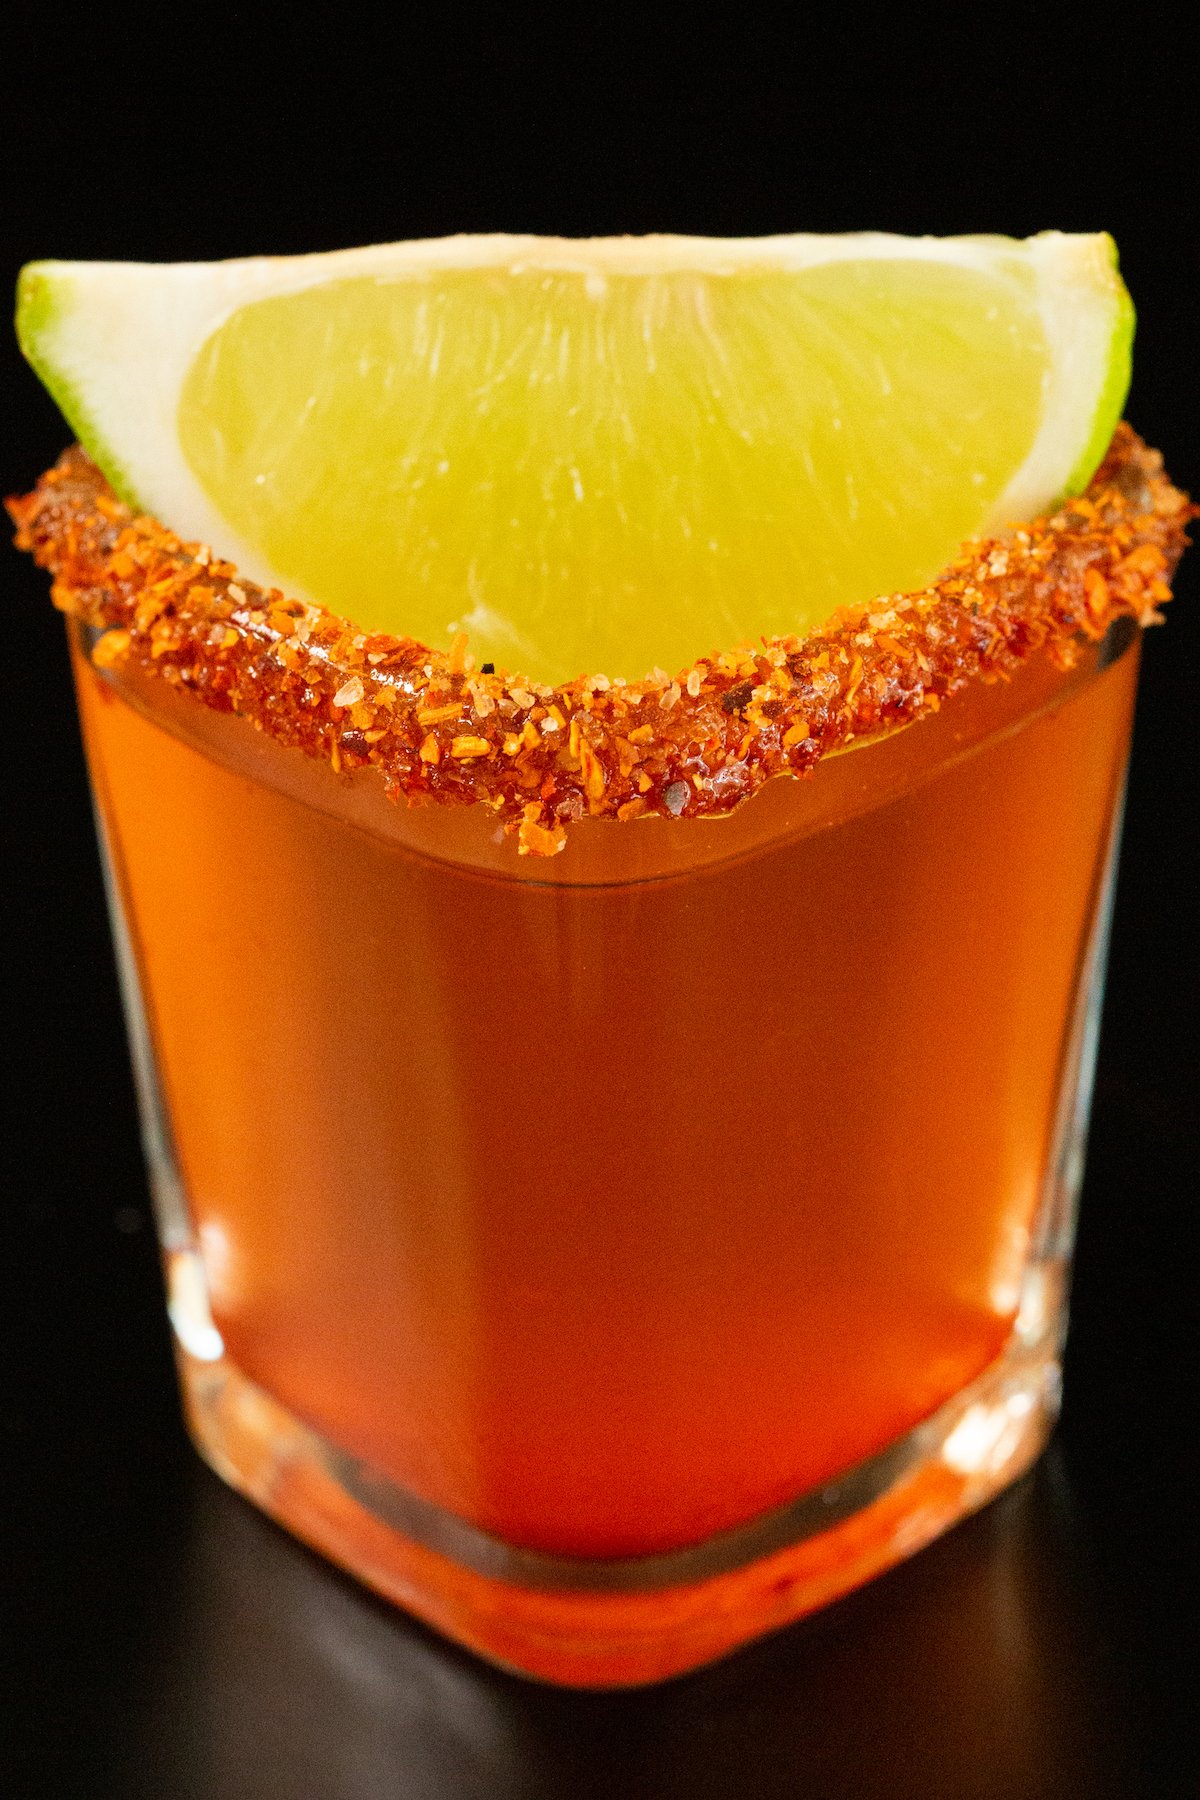 A single square shot glass has been filled with a pinkish-red Mexican candy shot. It is garnished with a chili powder rim and a lime wedge.